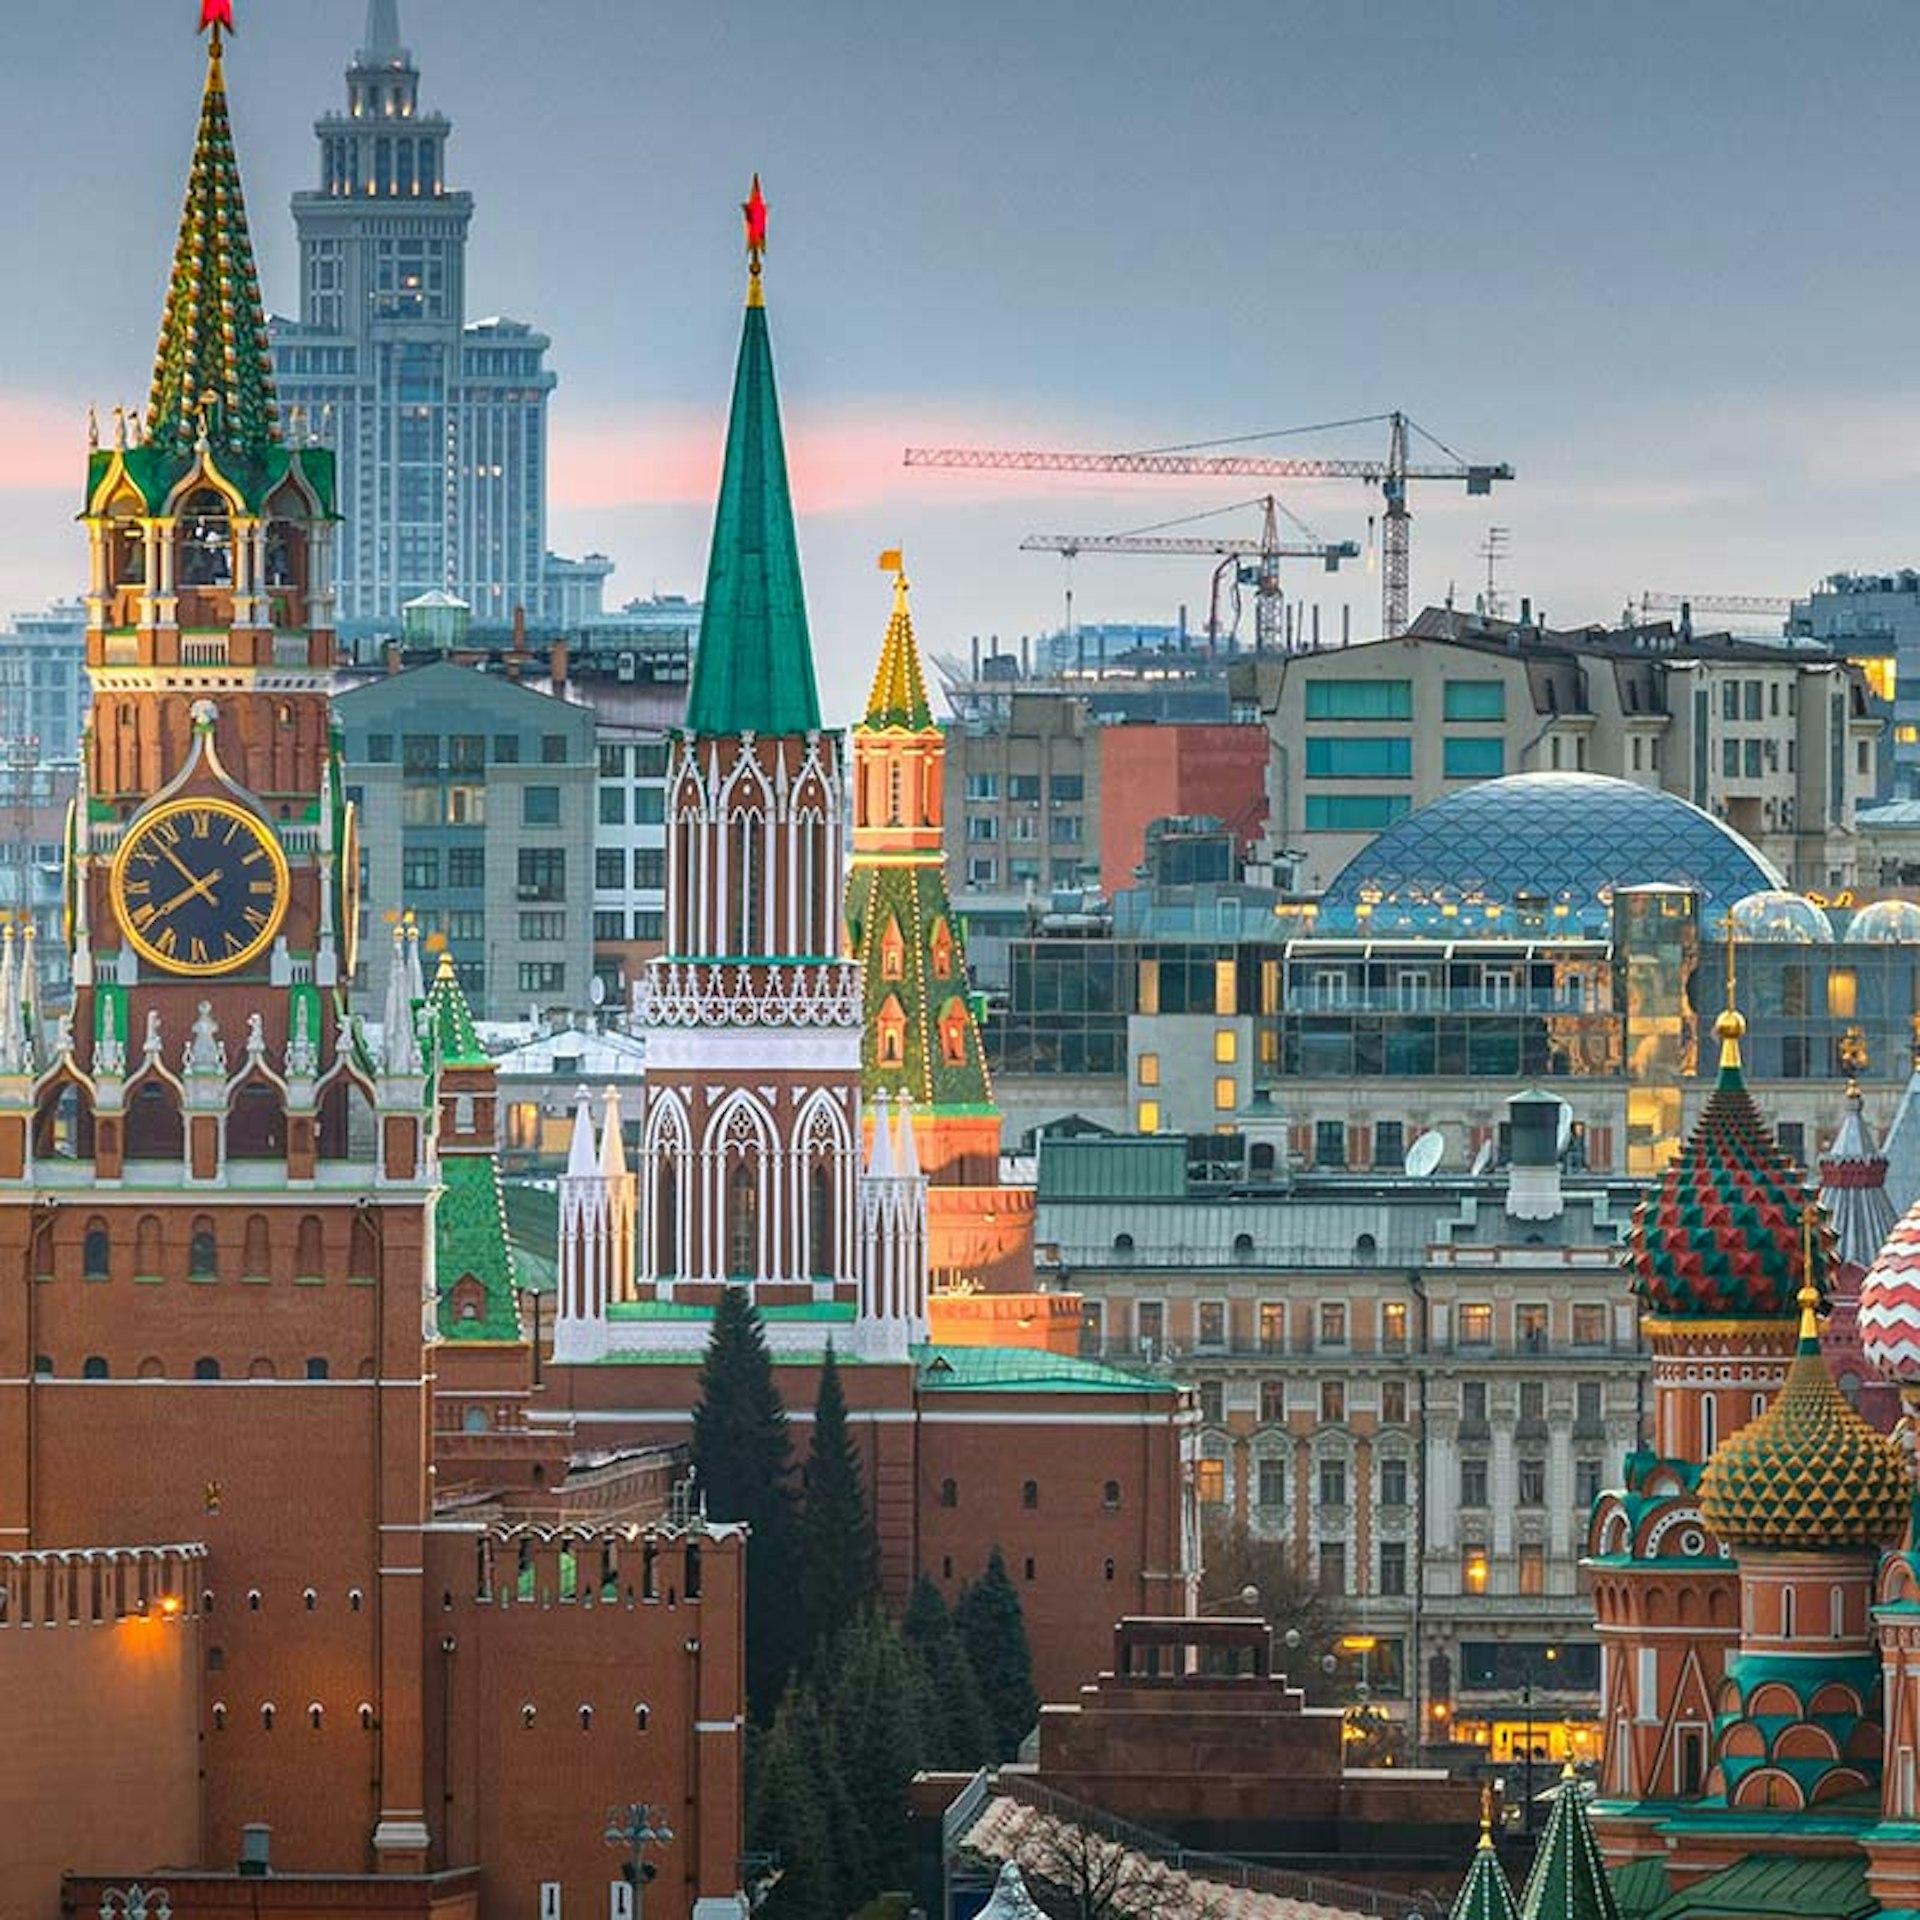 Get the latest news and updates on e-invoicing, e-ordering, e-archiving and indirect tax regulatory requirements for Russia.